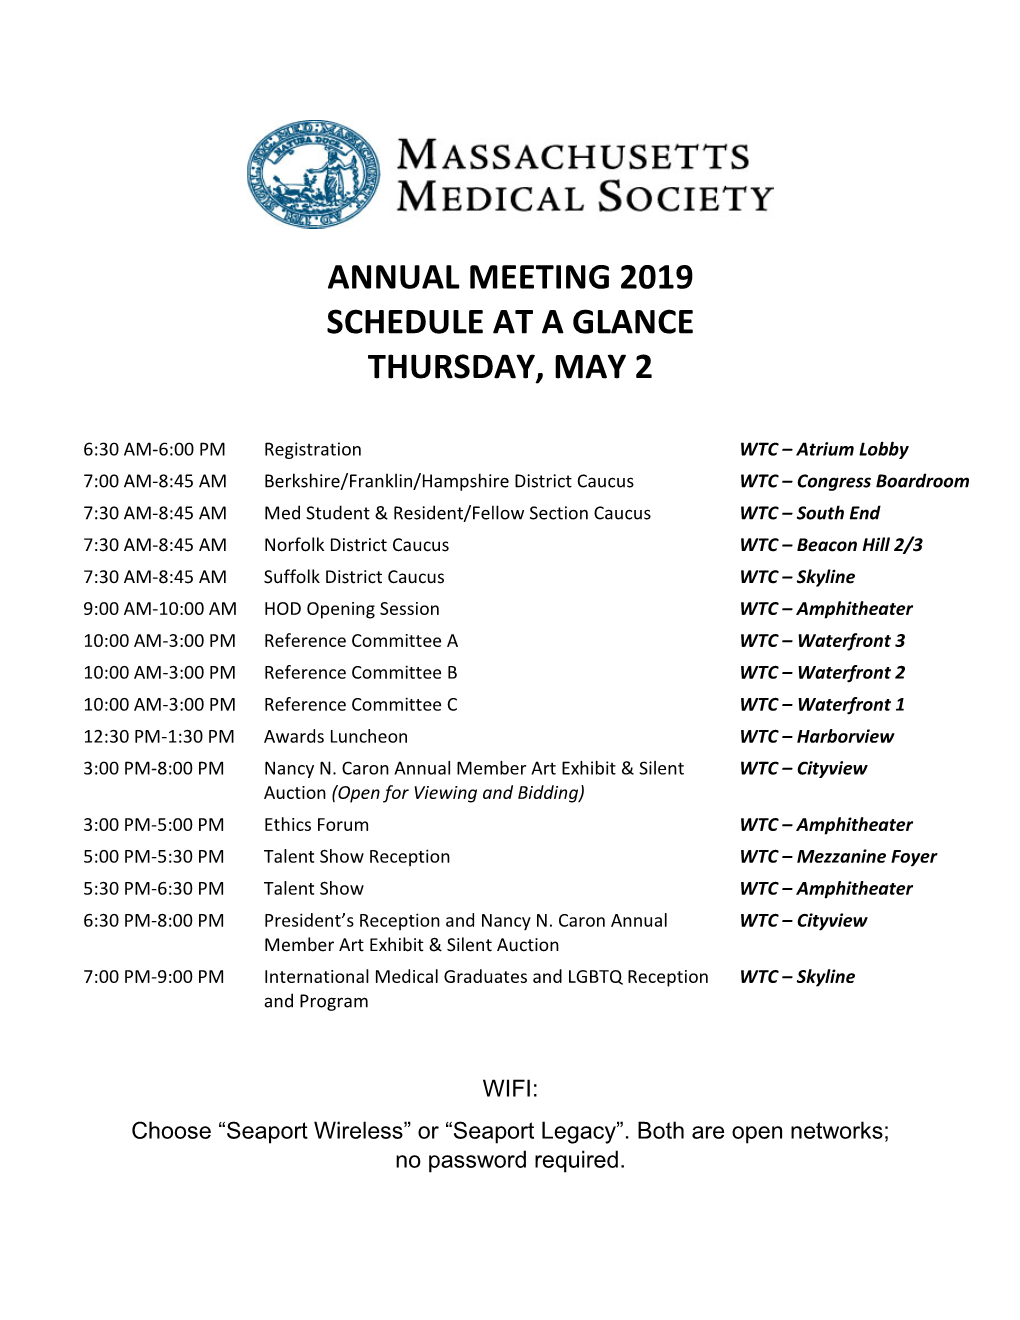 Annual Meeting 2019 Schedule at a Glance Thursday, May 2